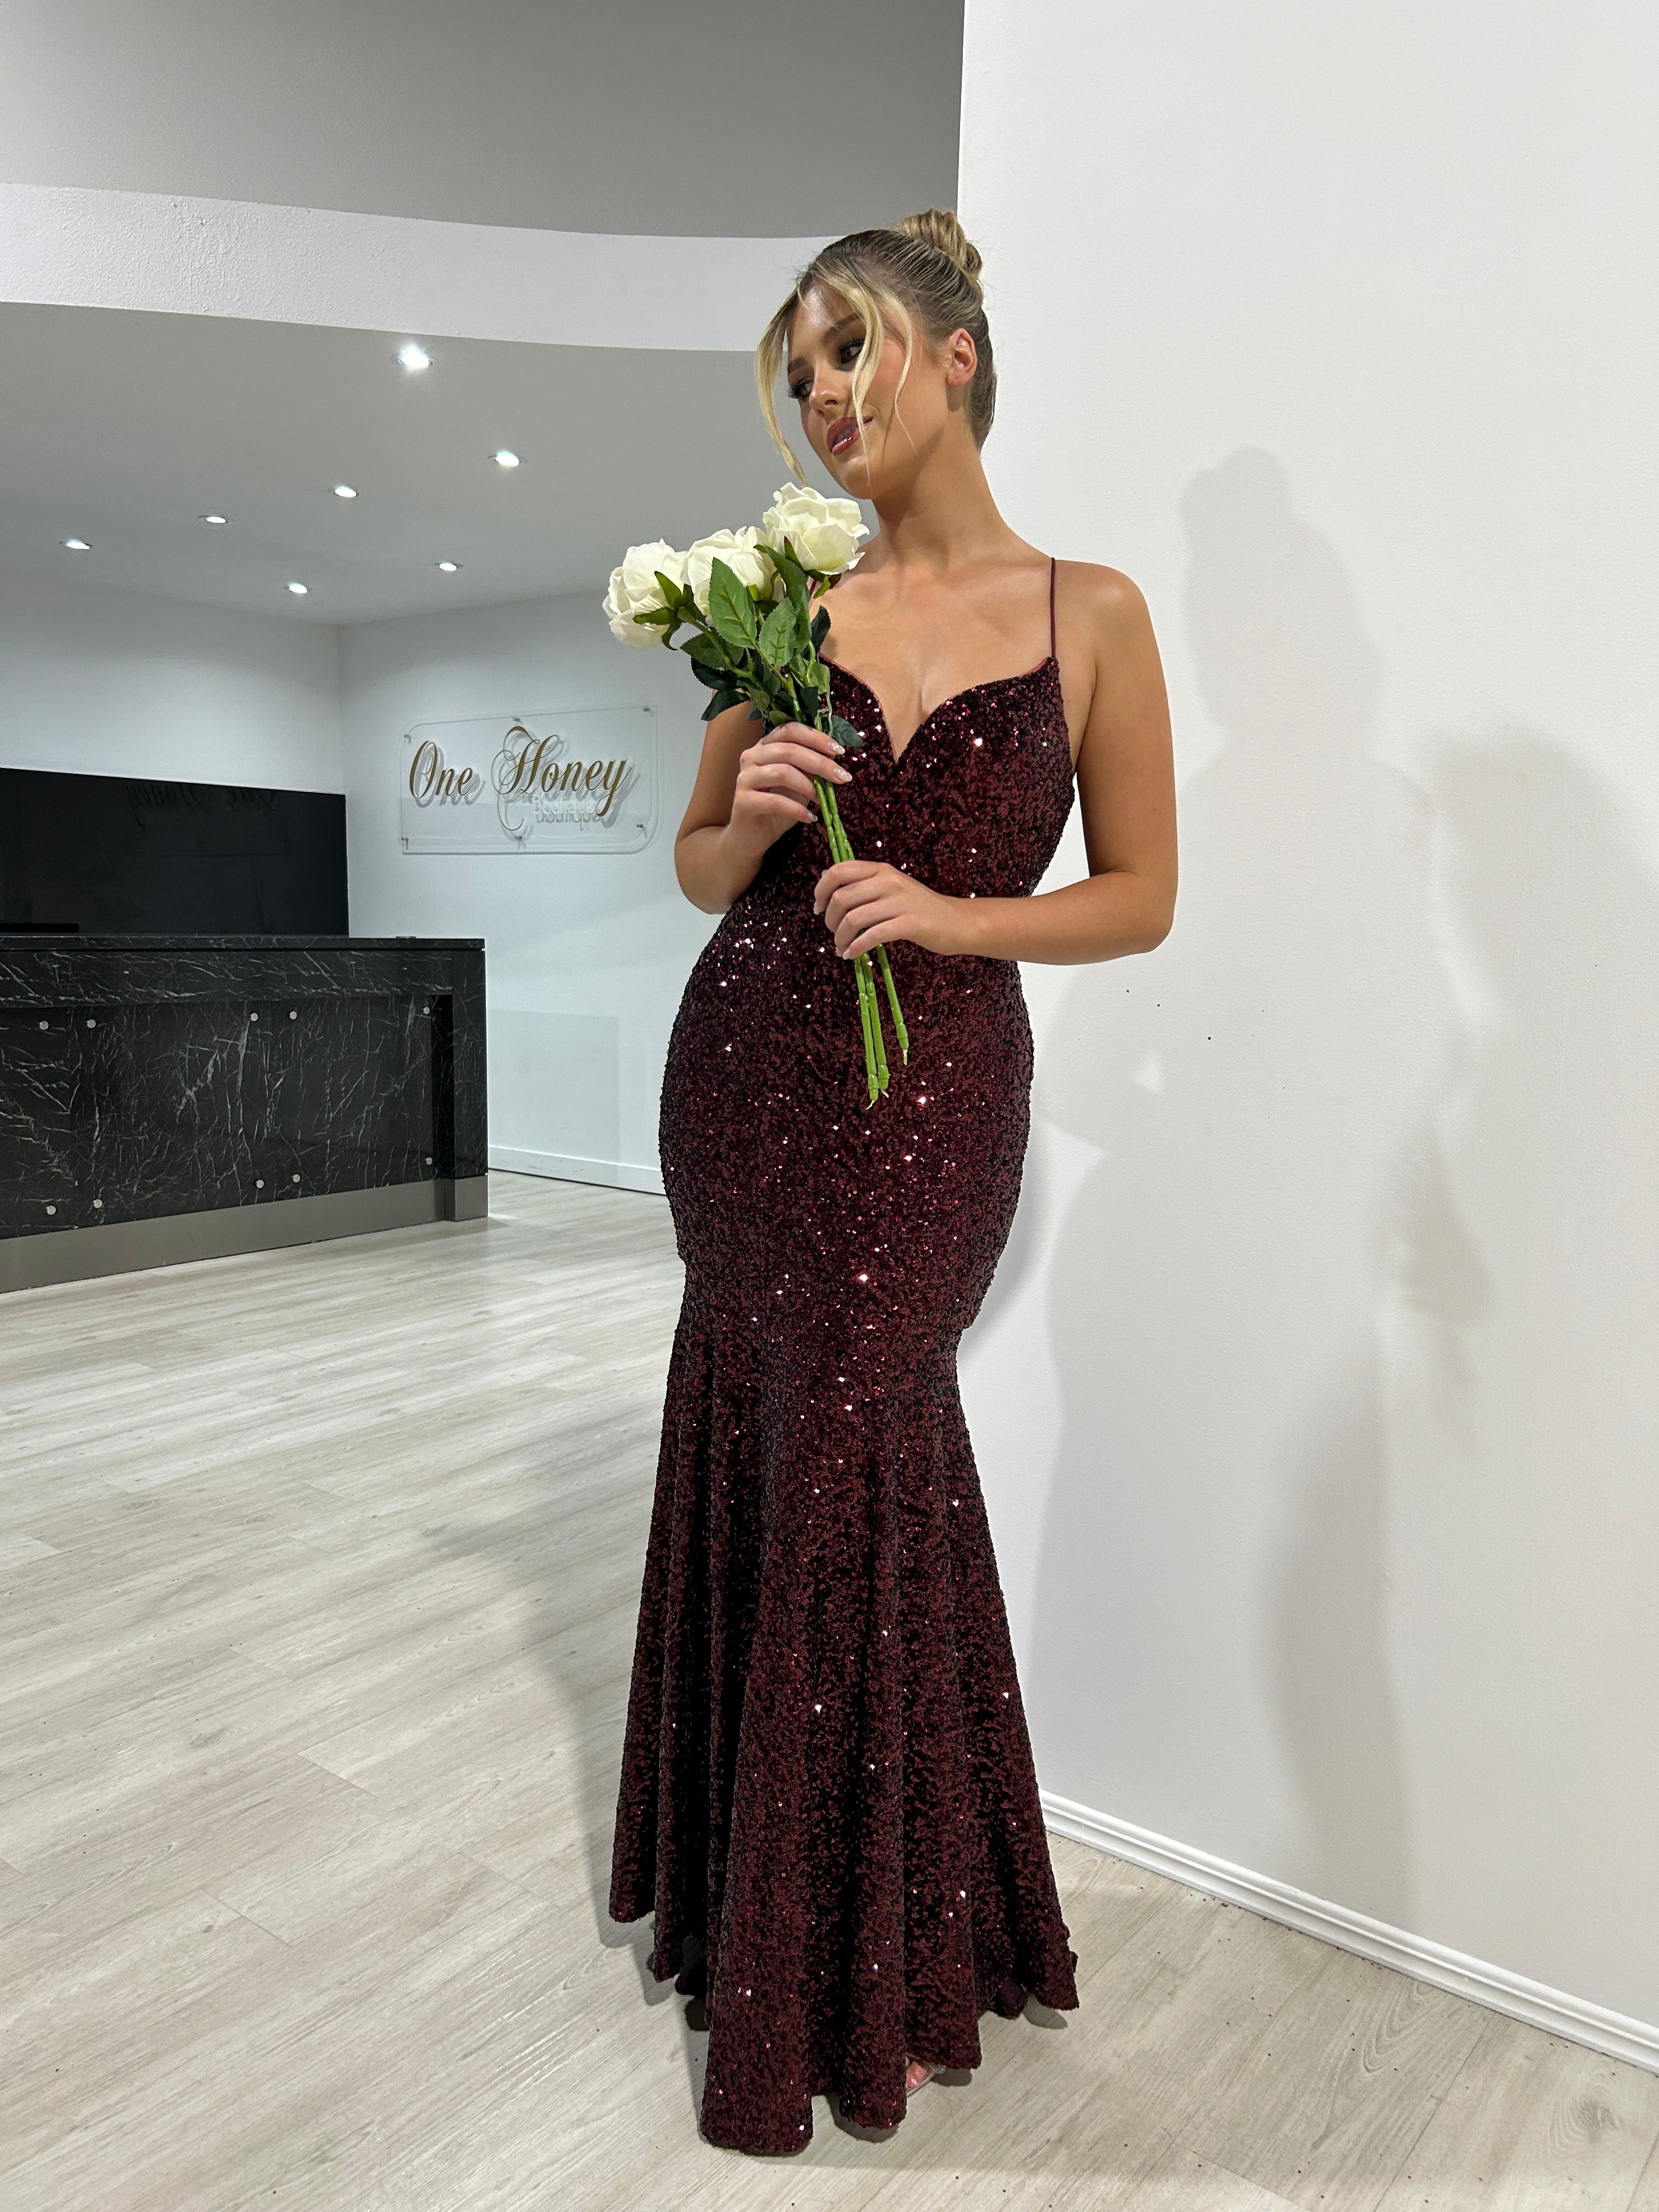 Honey Couture NORMA Burgundy Sequin Mermaid Formal Dress